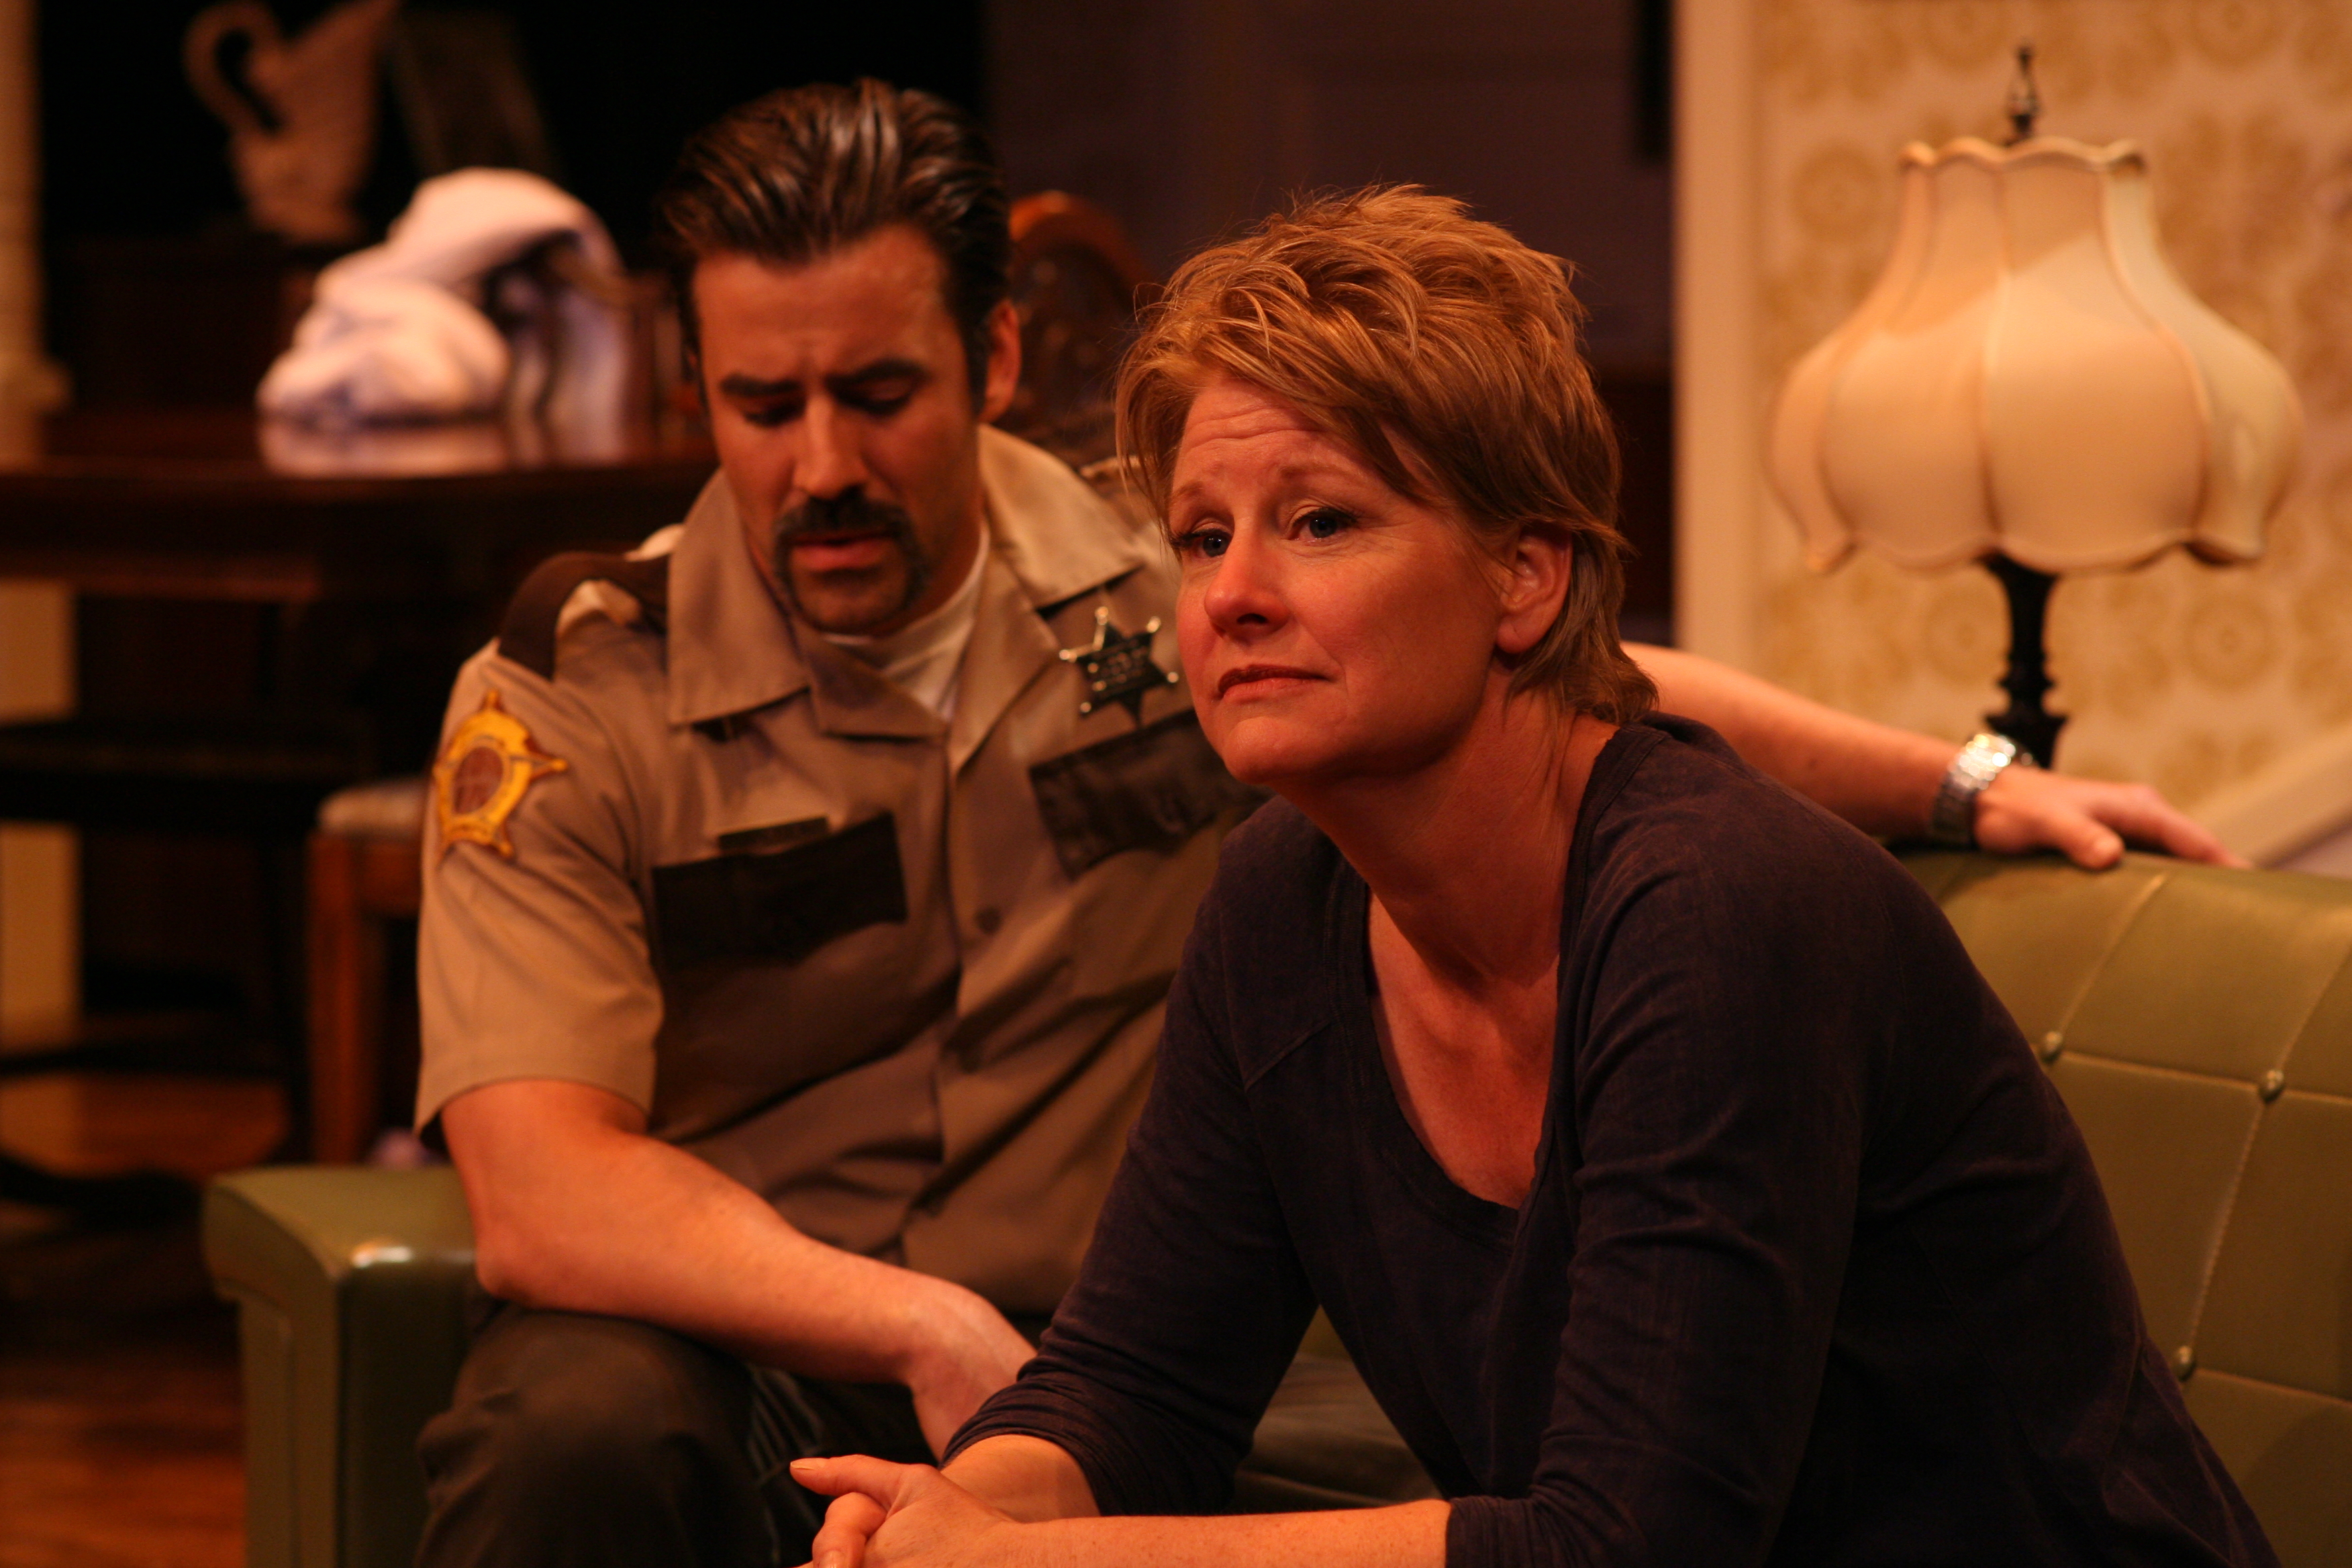 With Laura Lane in August: Osage County